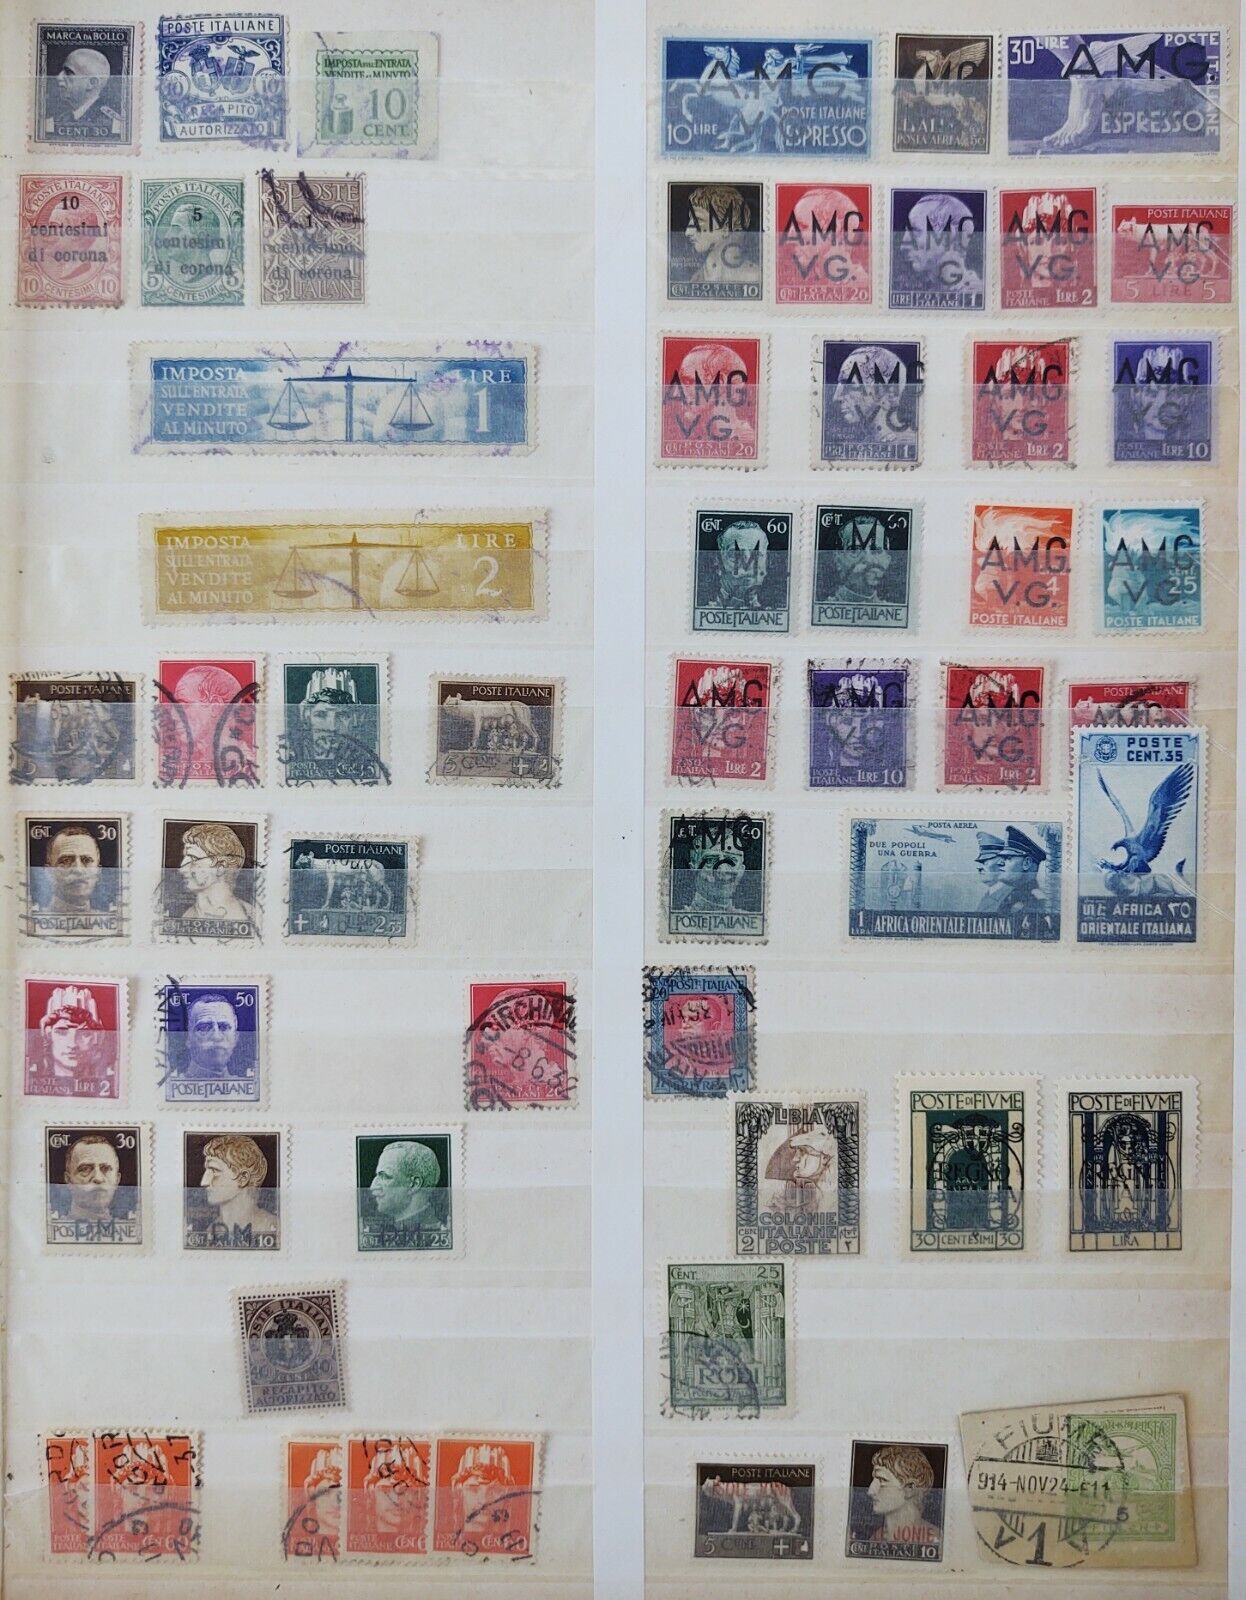 Italy 1885-1975 Stamps incl Colonies Airmail Express AMG Trieste >750 Stamps Без бренда